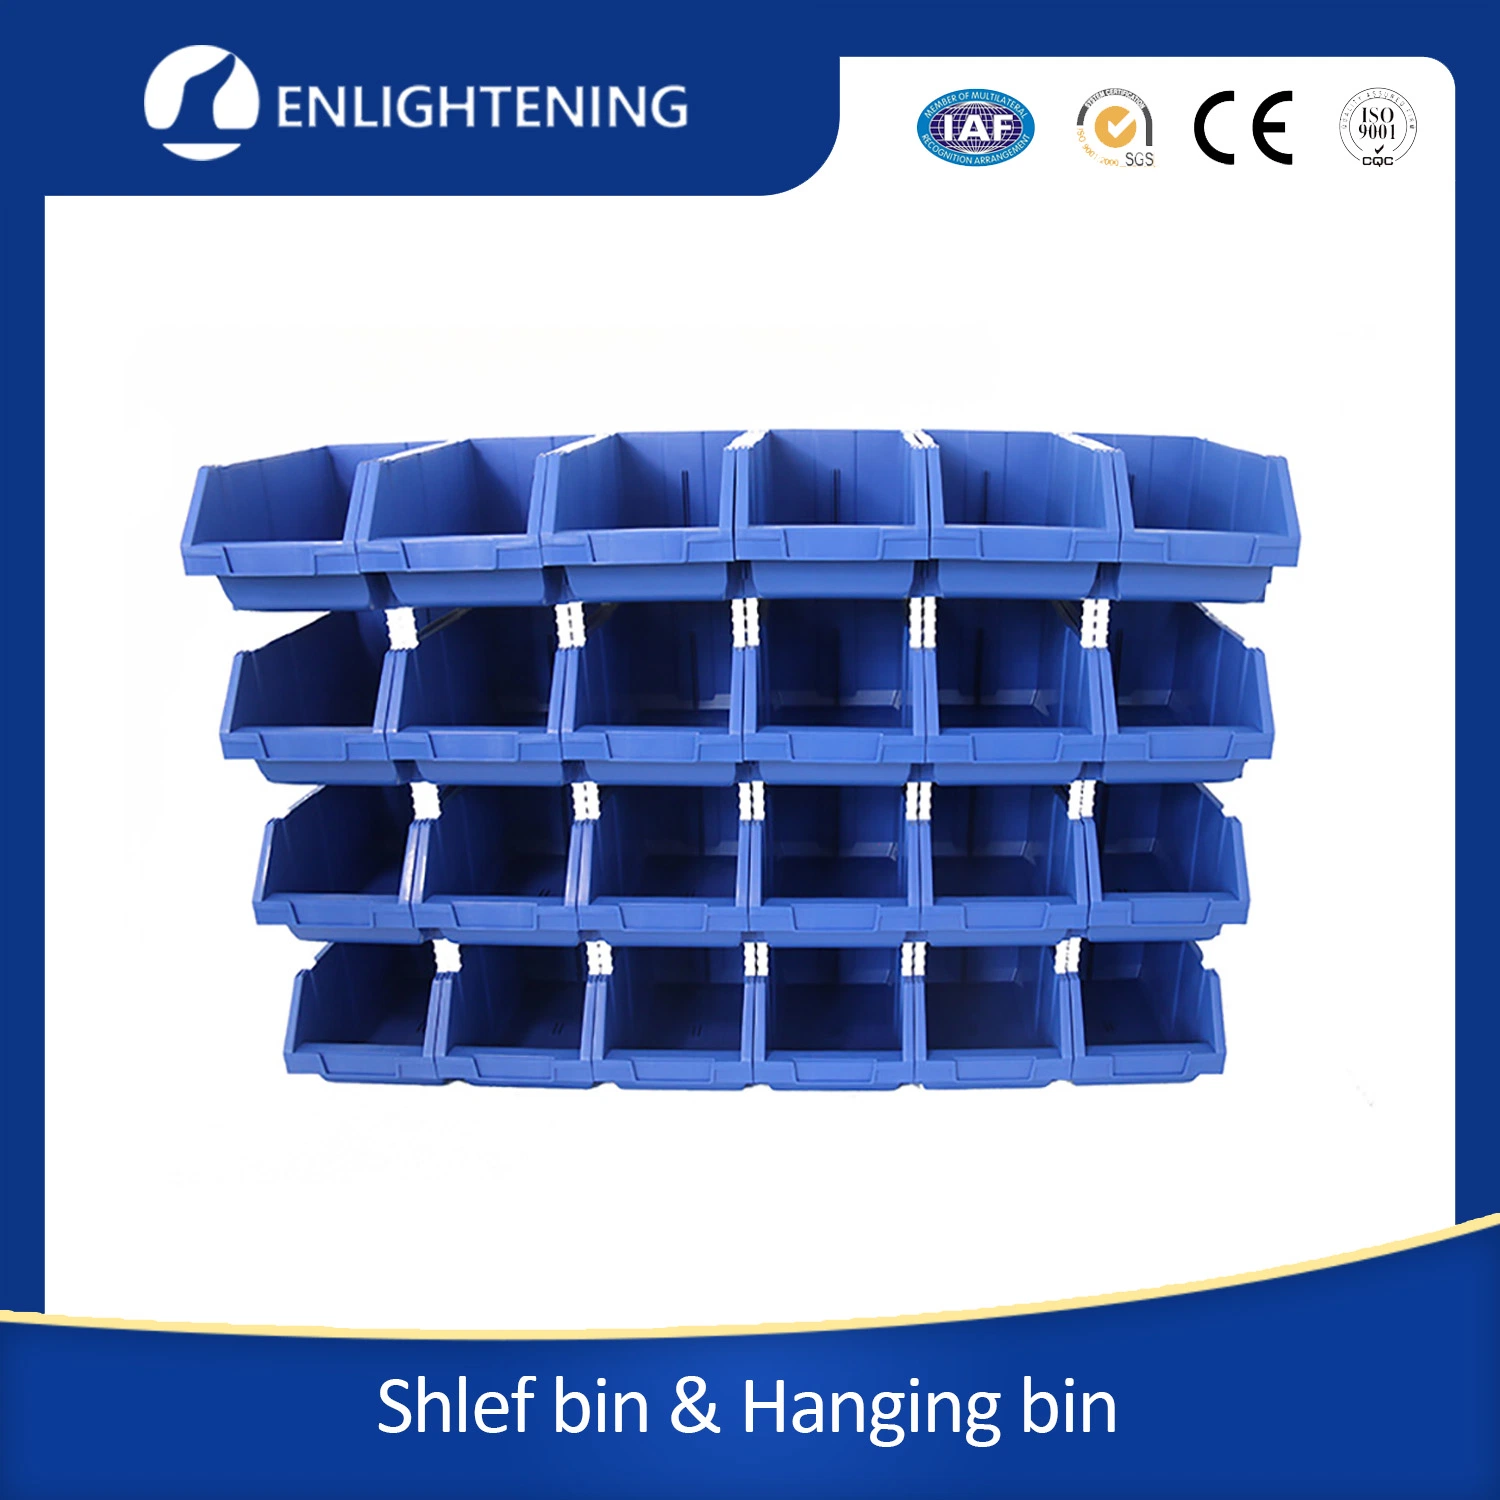 Fastener Automotive Industry Use Stack Plastic Spare Parts Pick Storage Bins for Tools Screws Bolts Nuts